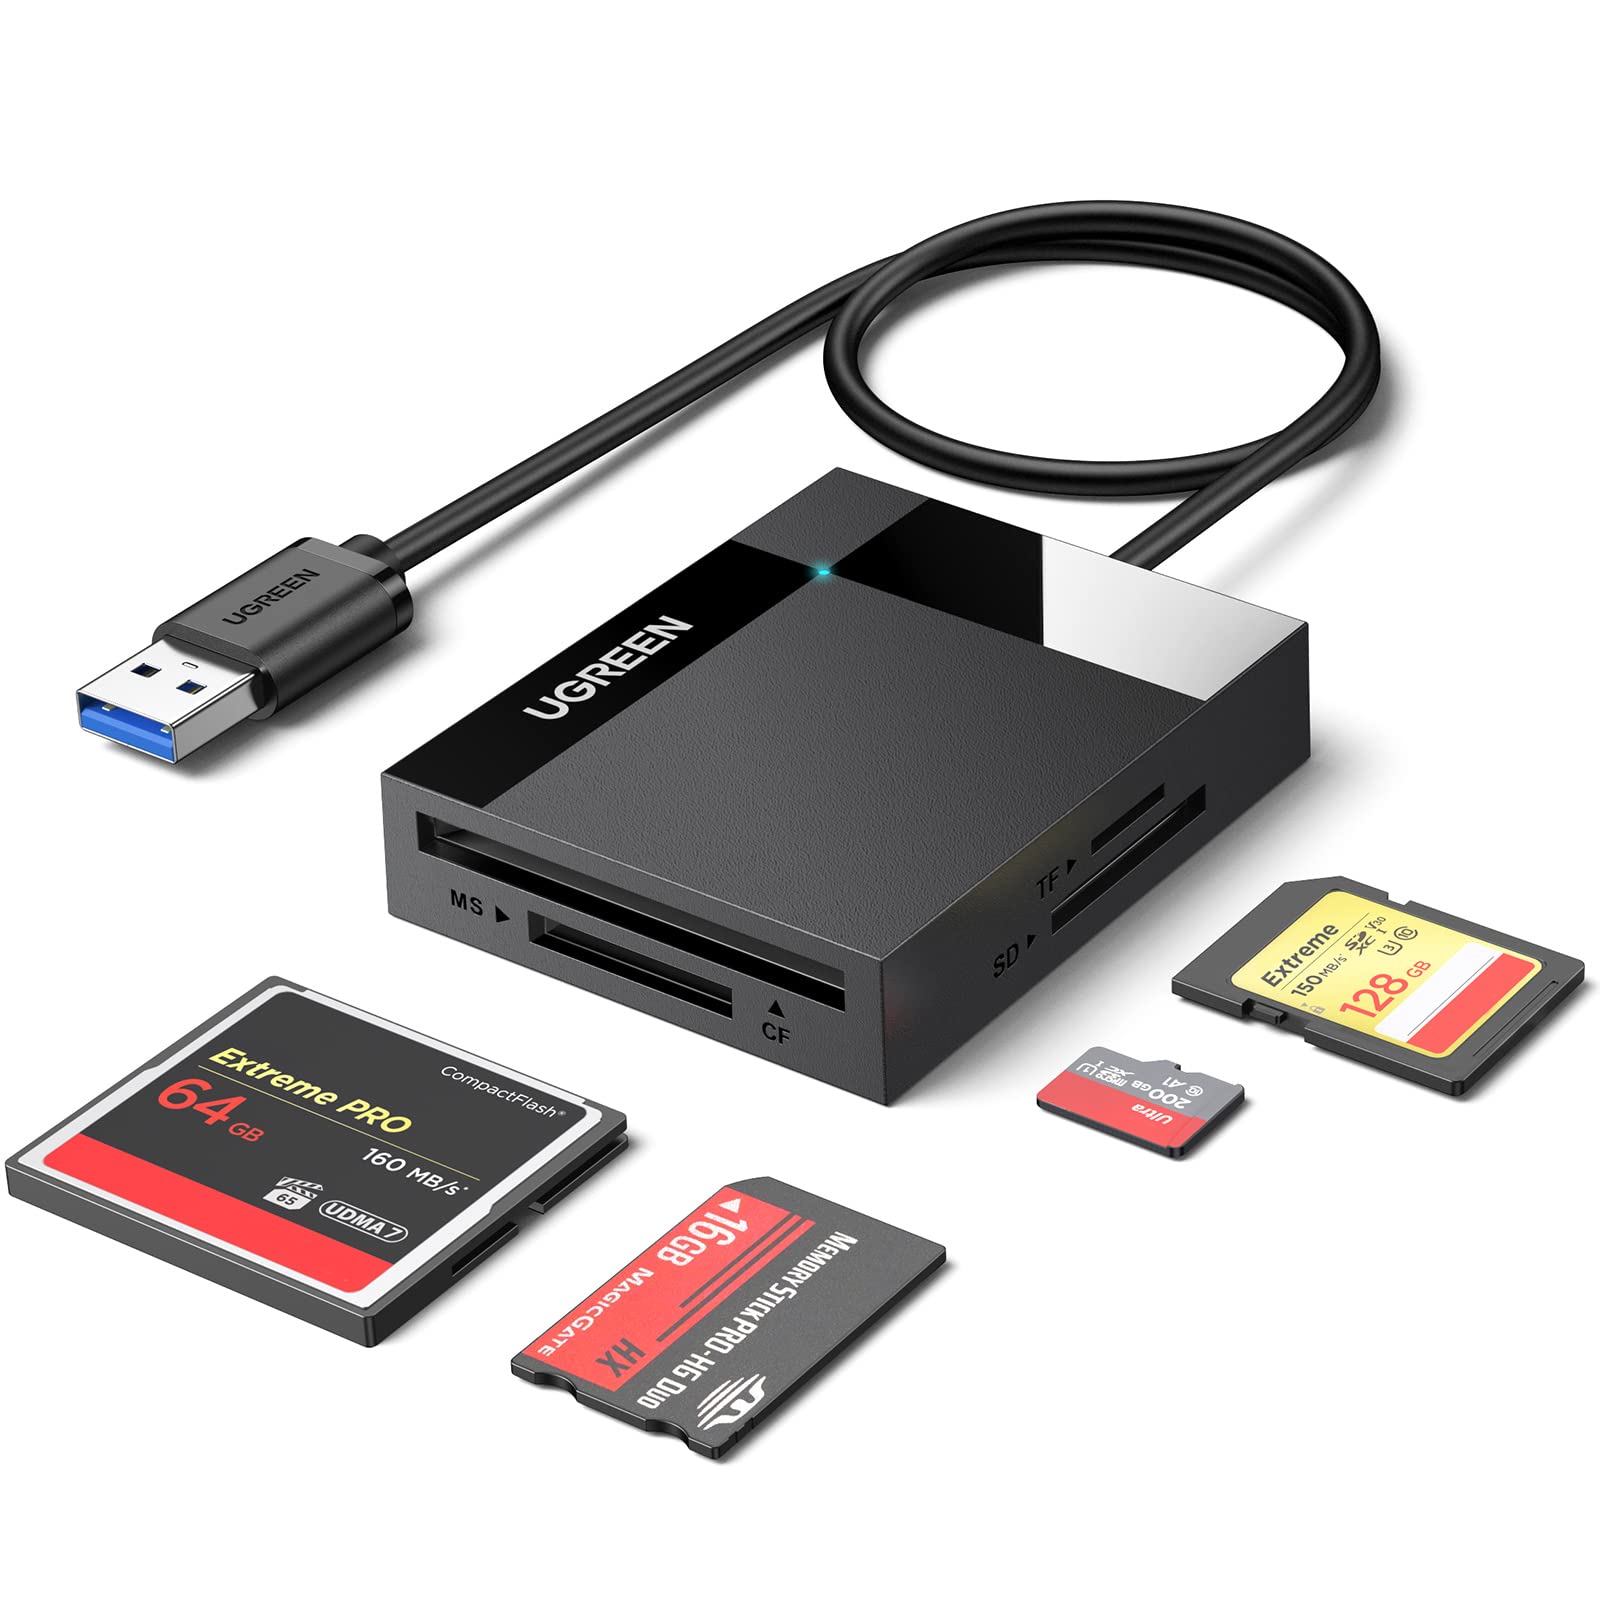 5. External Hard Drive: Connect your SD card to an external hard drive that has a built-in SD card slot.
6. Multi-card Reader: Use a multi-card reader that supports SD cards to connect your SD card to your computer.